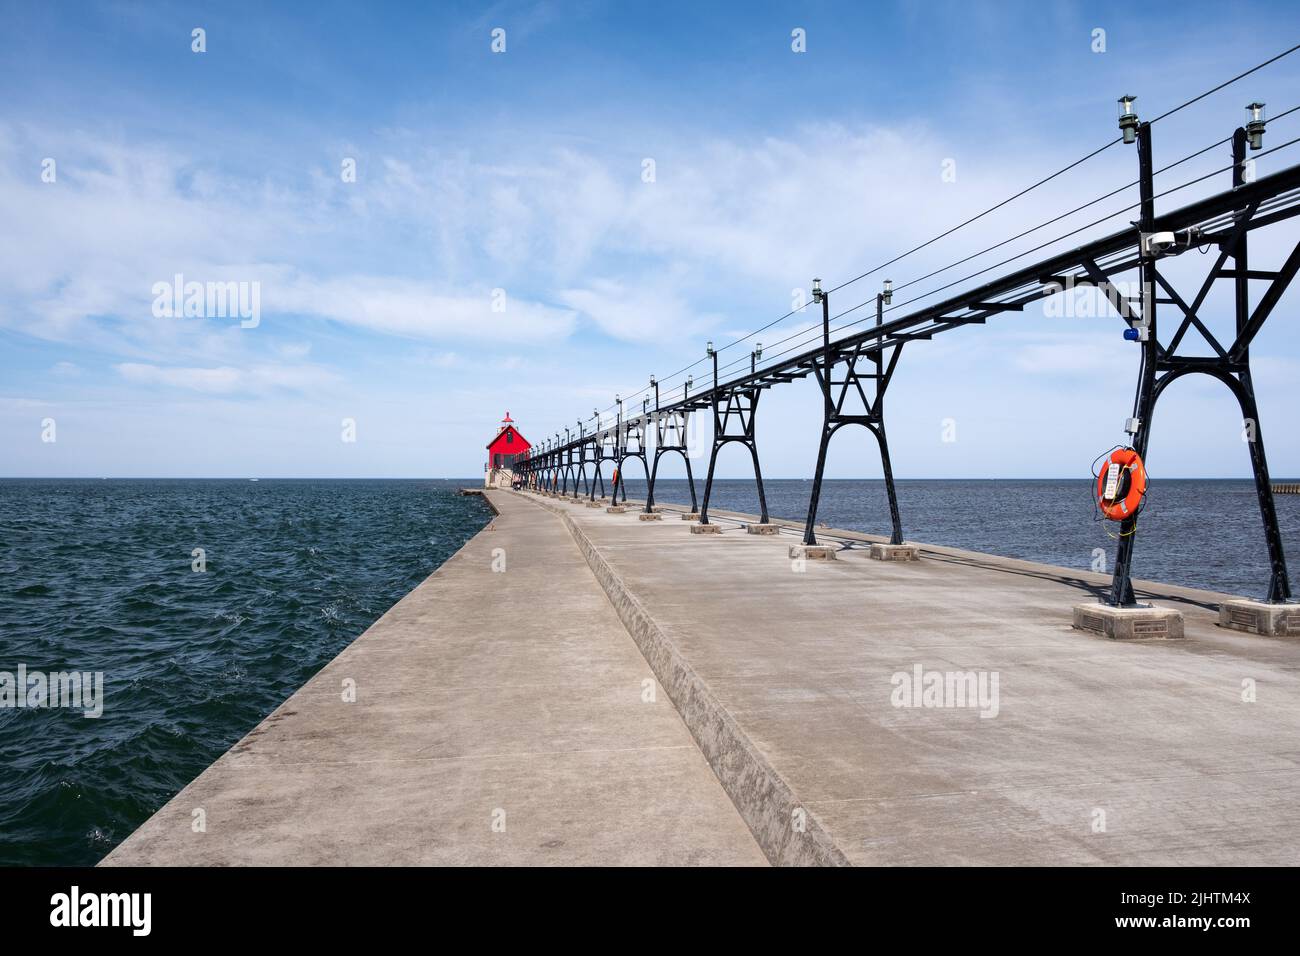 Landscape of the Grand Haven Lighthouse, pier, and catwalk, Lake Michigan, Michigan, USA Stock Photo